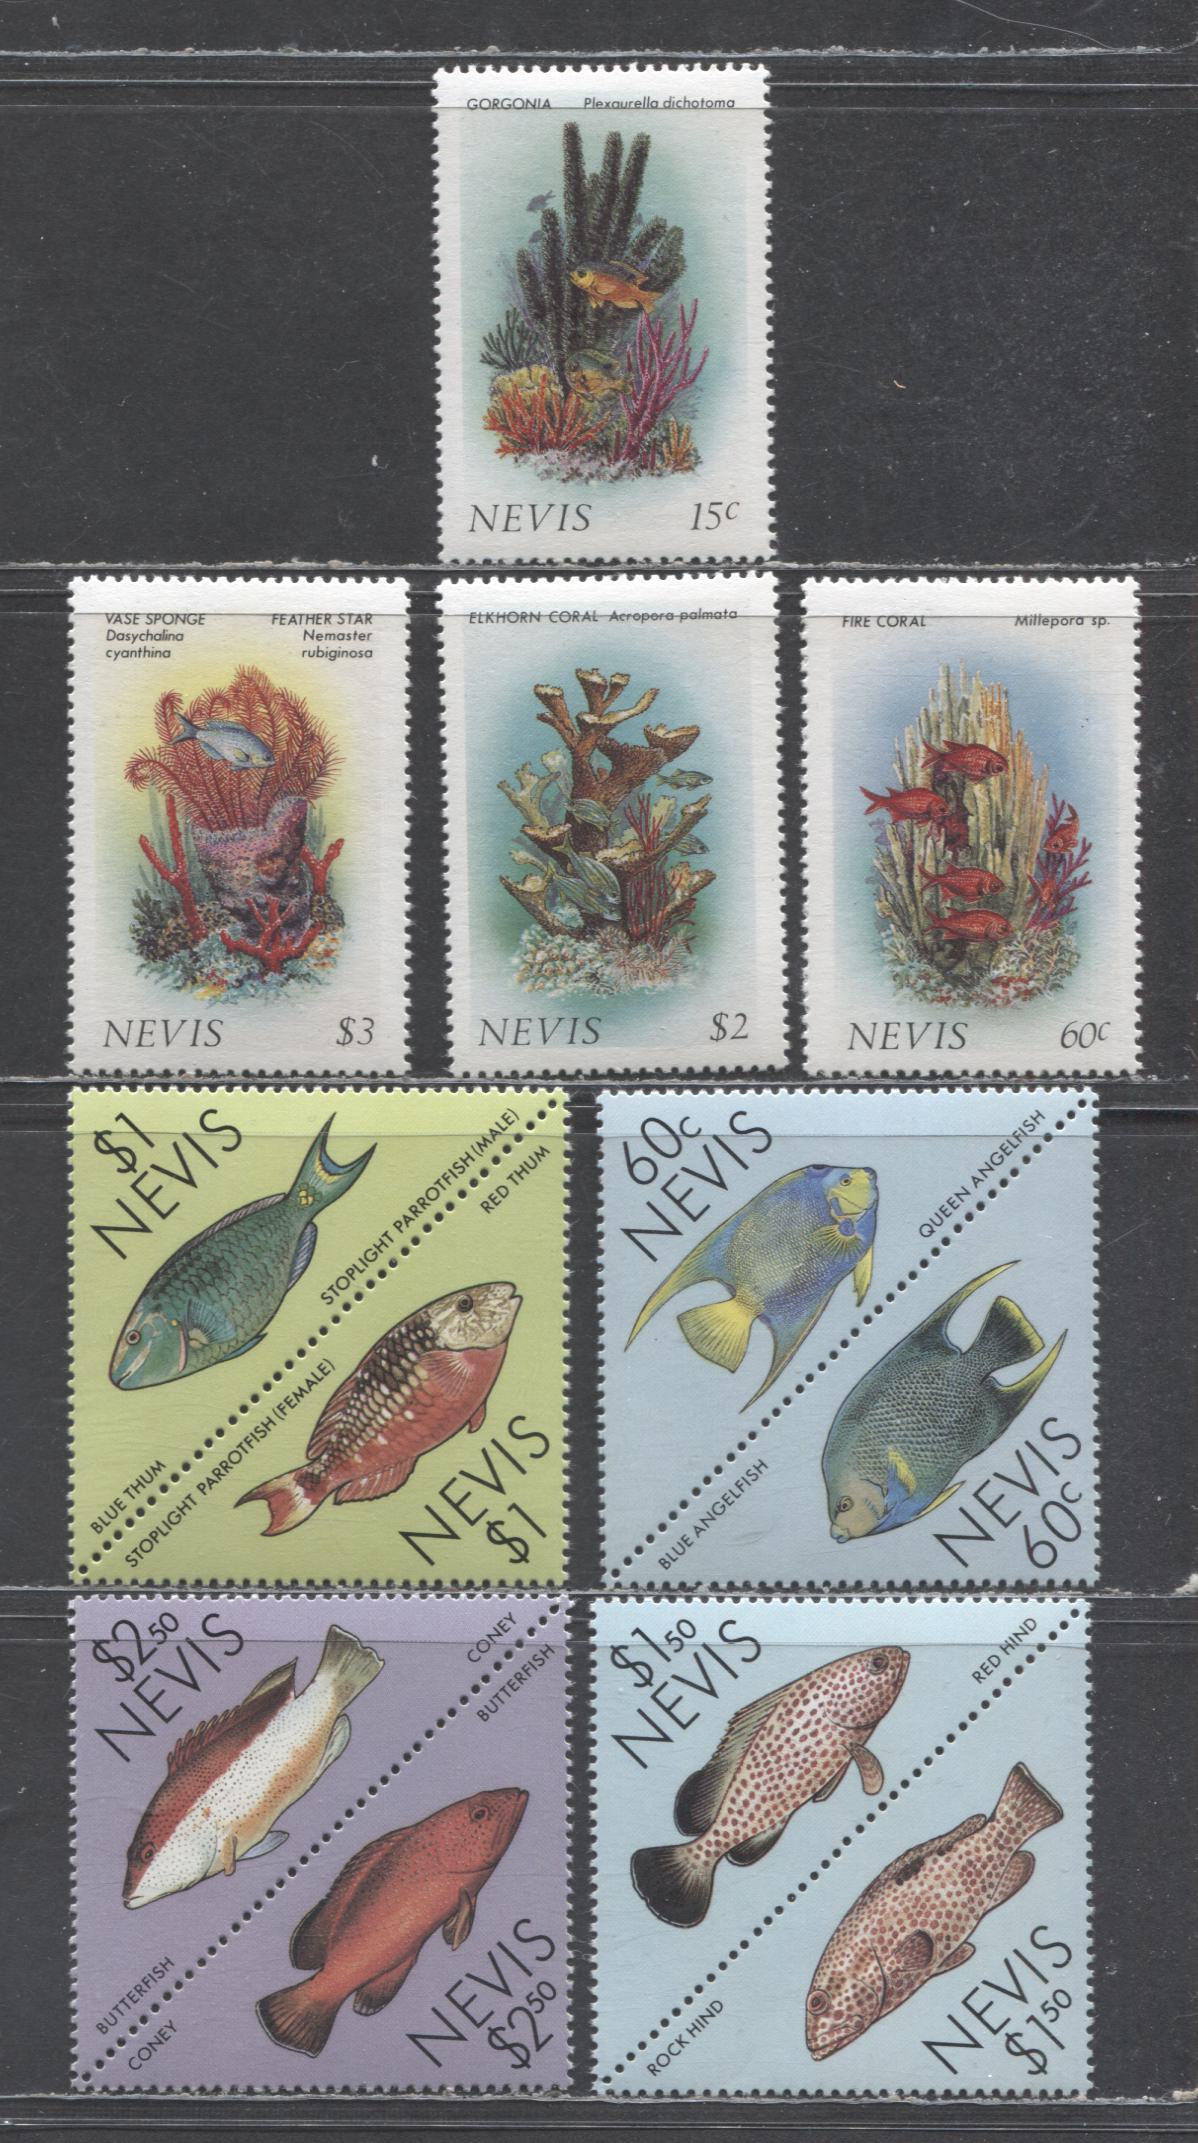 Lot 116 Nevis SC#503/547 1986-1987 Corals & Fish Issues, 9.55 VFNH Singles, Click on Listing to See ALL Pictures, 2017 Scott Cat. $9.55